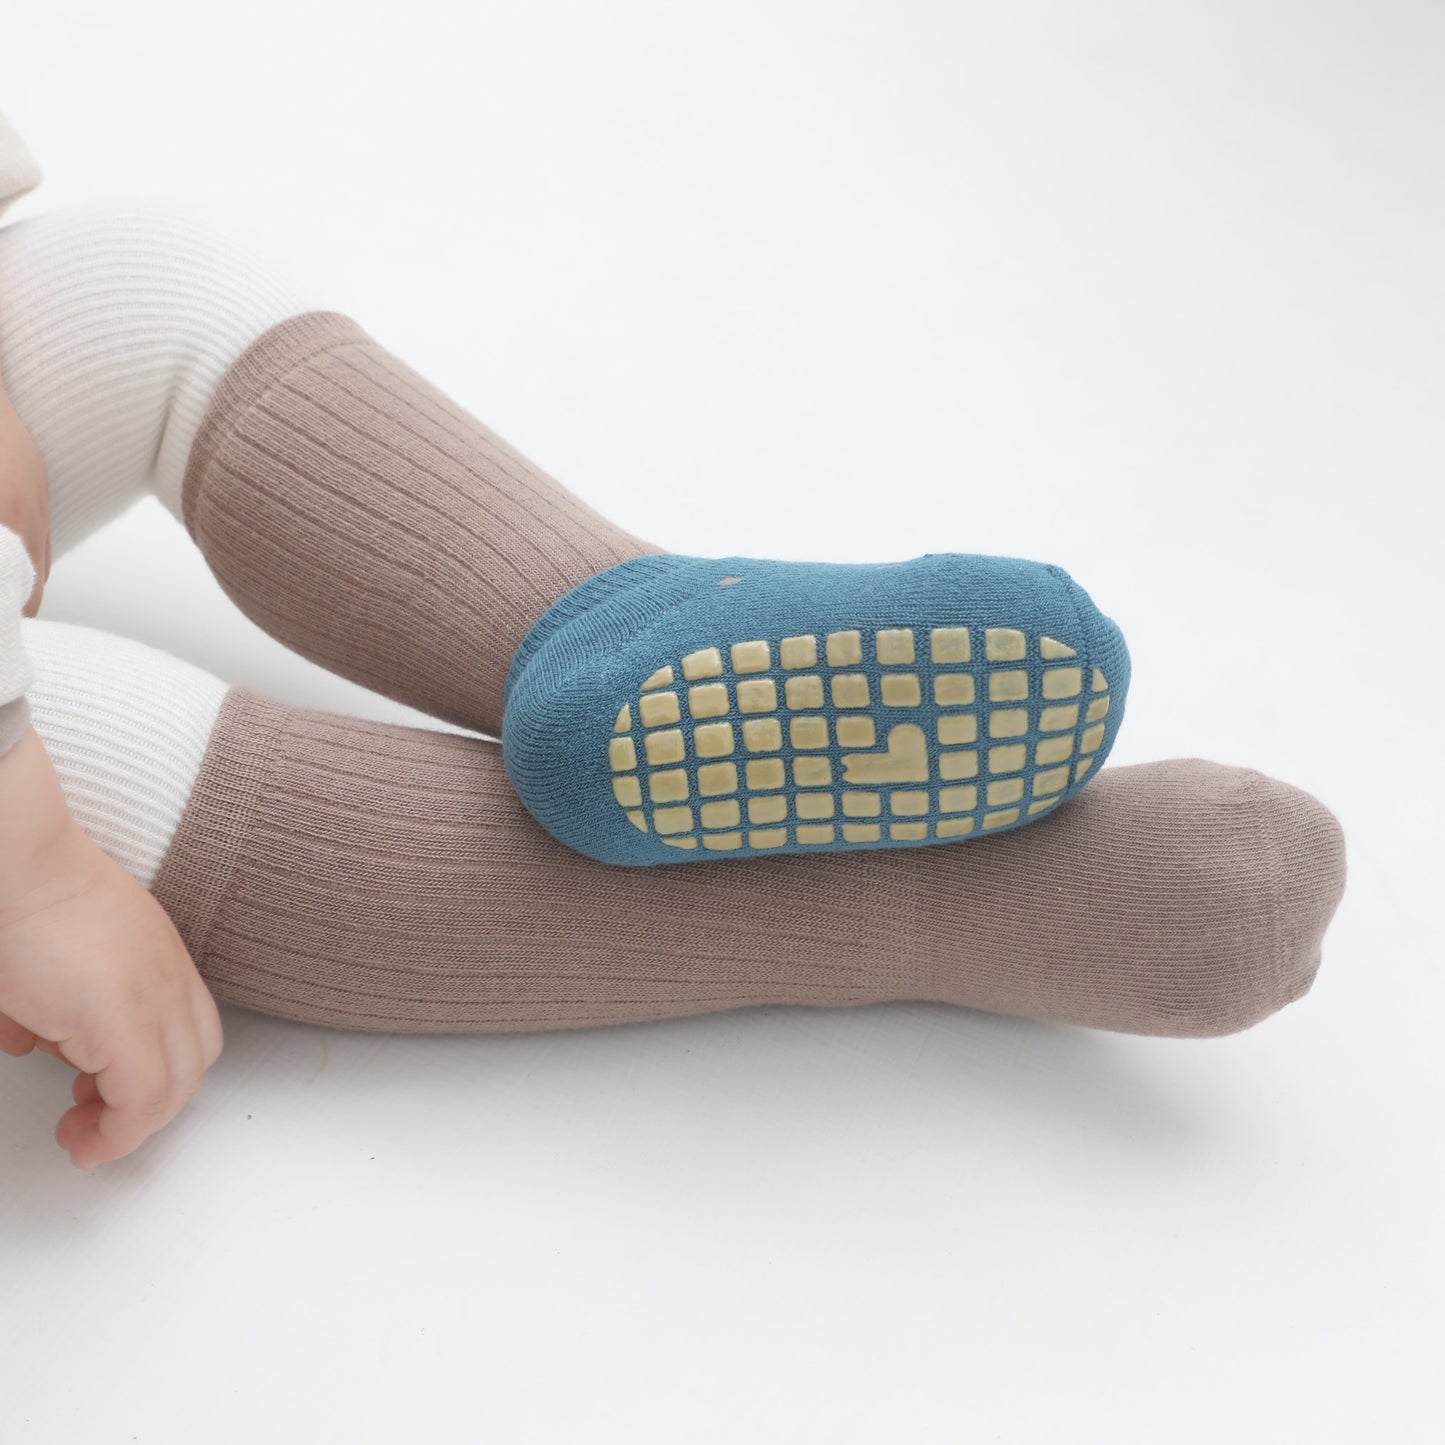 non-slip baby socks for everyday comfort and protection.